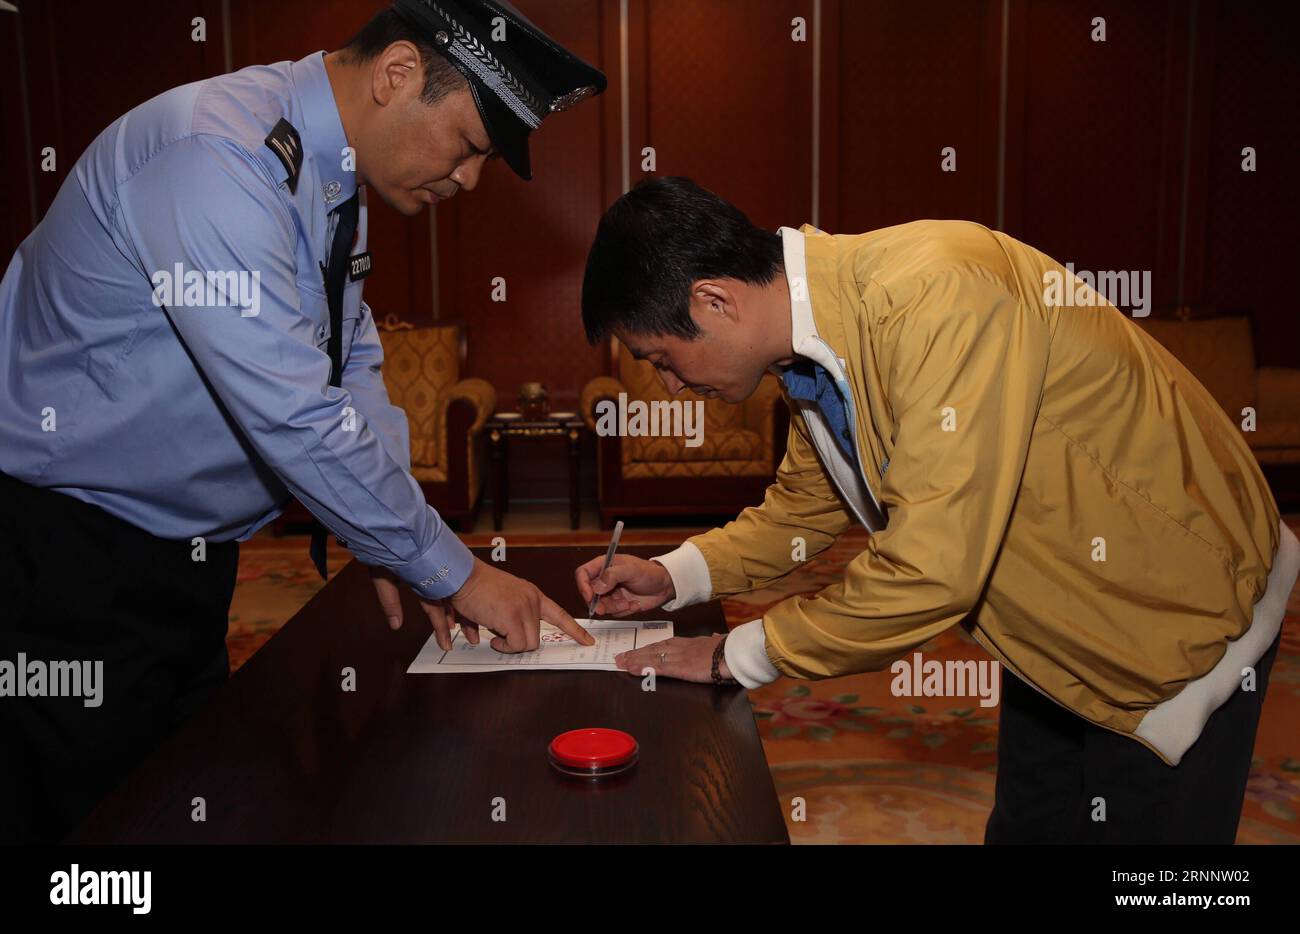 (170729) -- BEIJING, July 29, 2017 -- Ren Biao (R) signs on his arrest warrant at Beijing Capital International Airport in Beijing, capital of China, July 29, 2017. Ren Biao, one of China s most wanted fugitives, has returned to China and turned himself in to the police, the anti-corruption authority said Saturday. Ren, 44, former actual controlling shareholder of Daluo energy supplies company in east China s Jiangsu Province, fled to the Caribbean nation of Saint Kitts and Nevis in January 2014 after being accused of fraudulently obtaining loans and fabricating financial bills, according to a Stock Photo